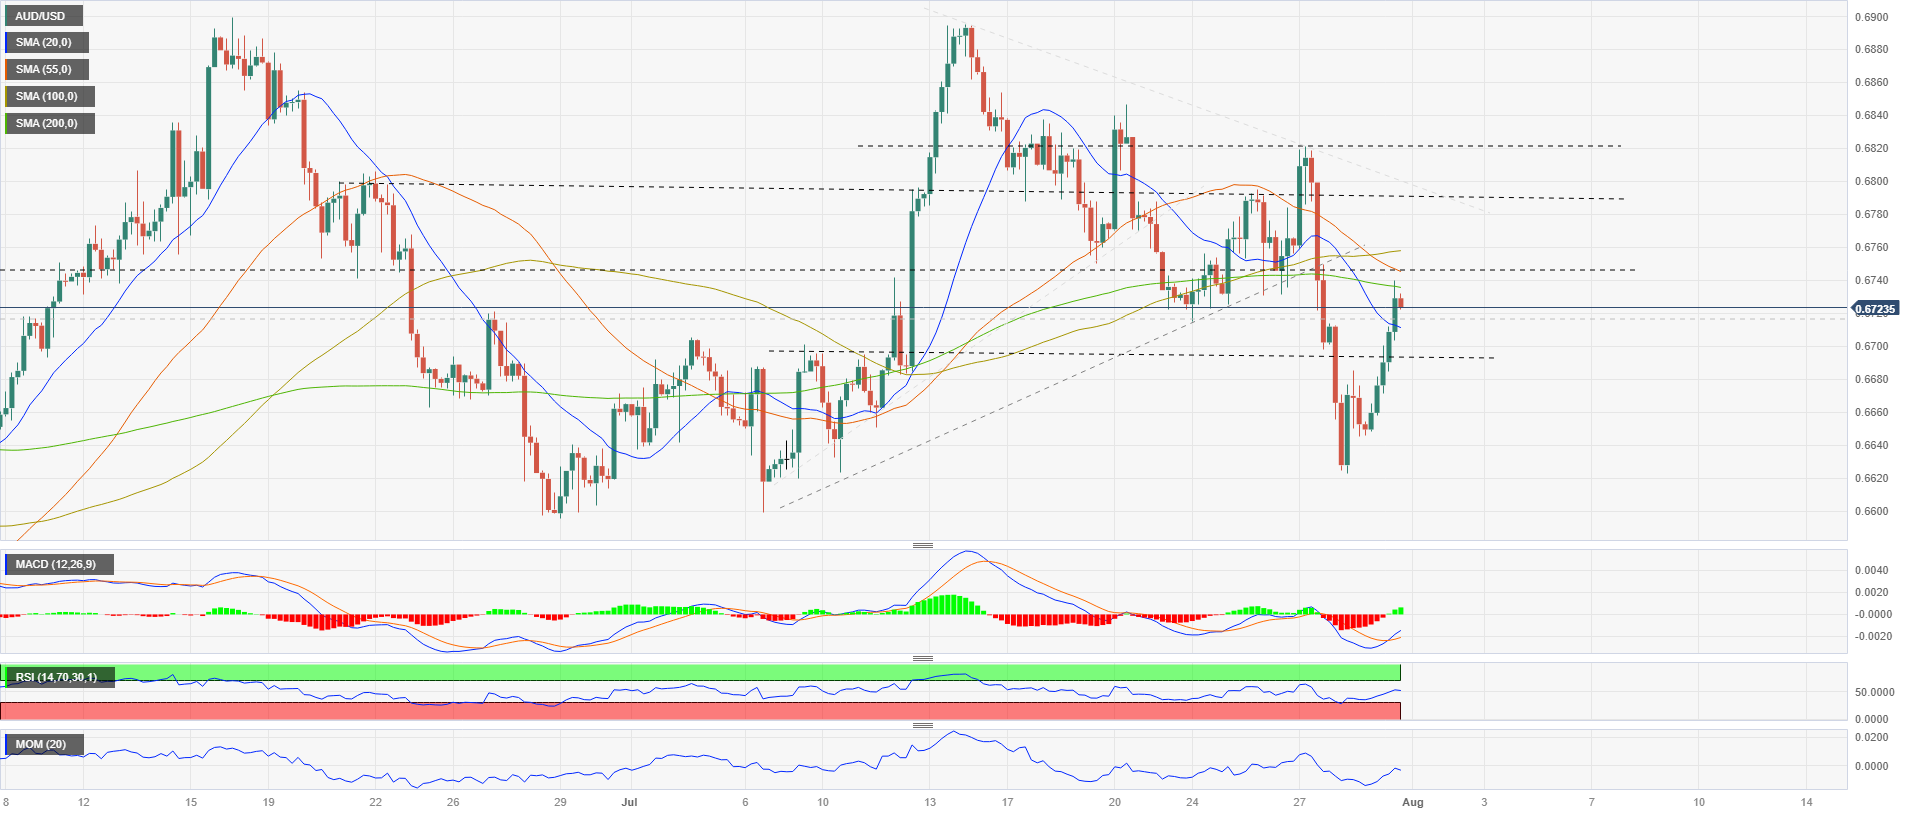 AUD/USD Forecast Aussie rebounds as attention turns to the RBA